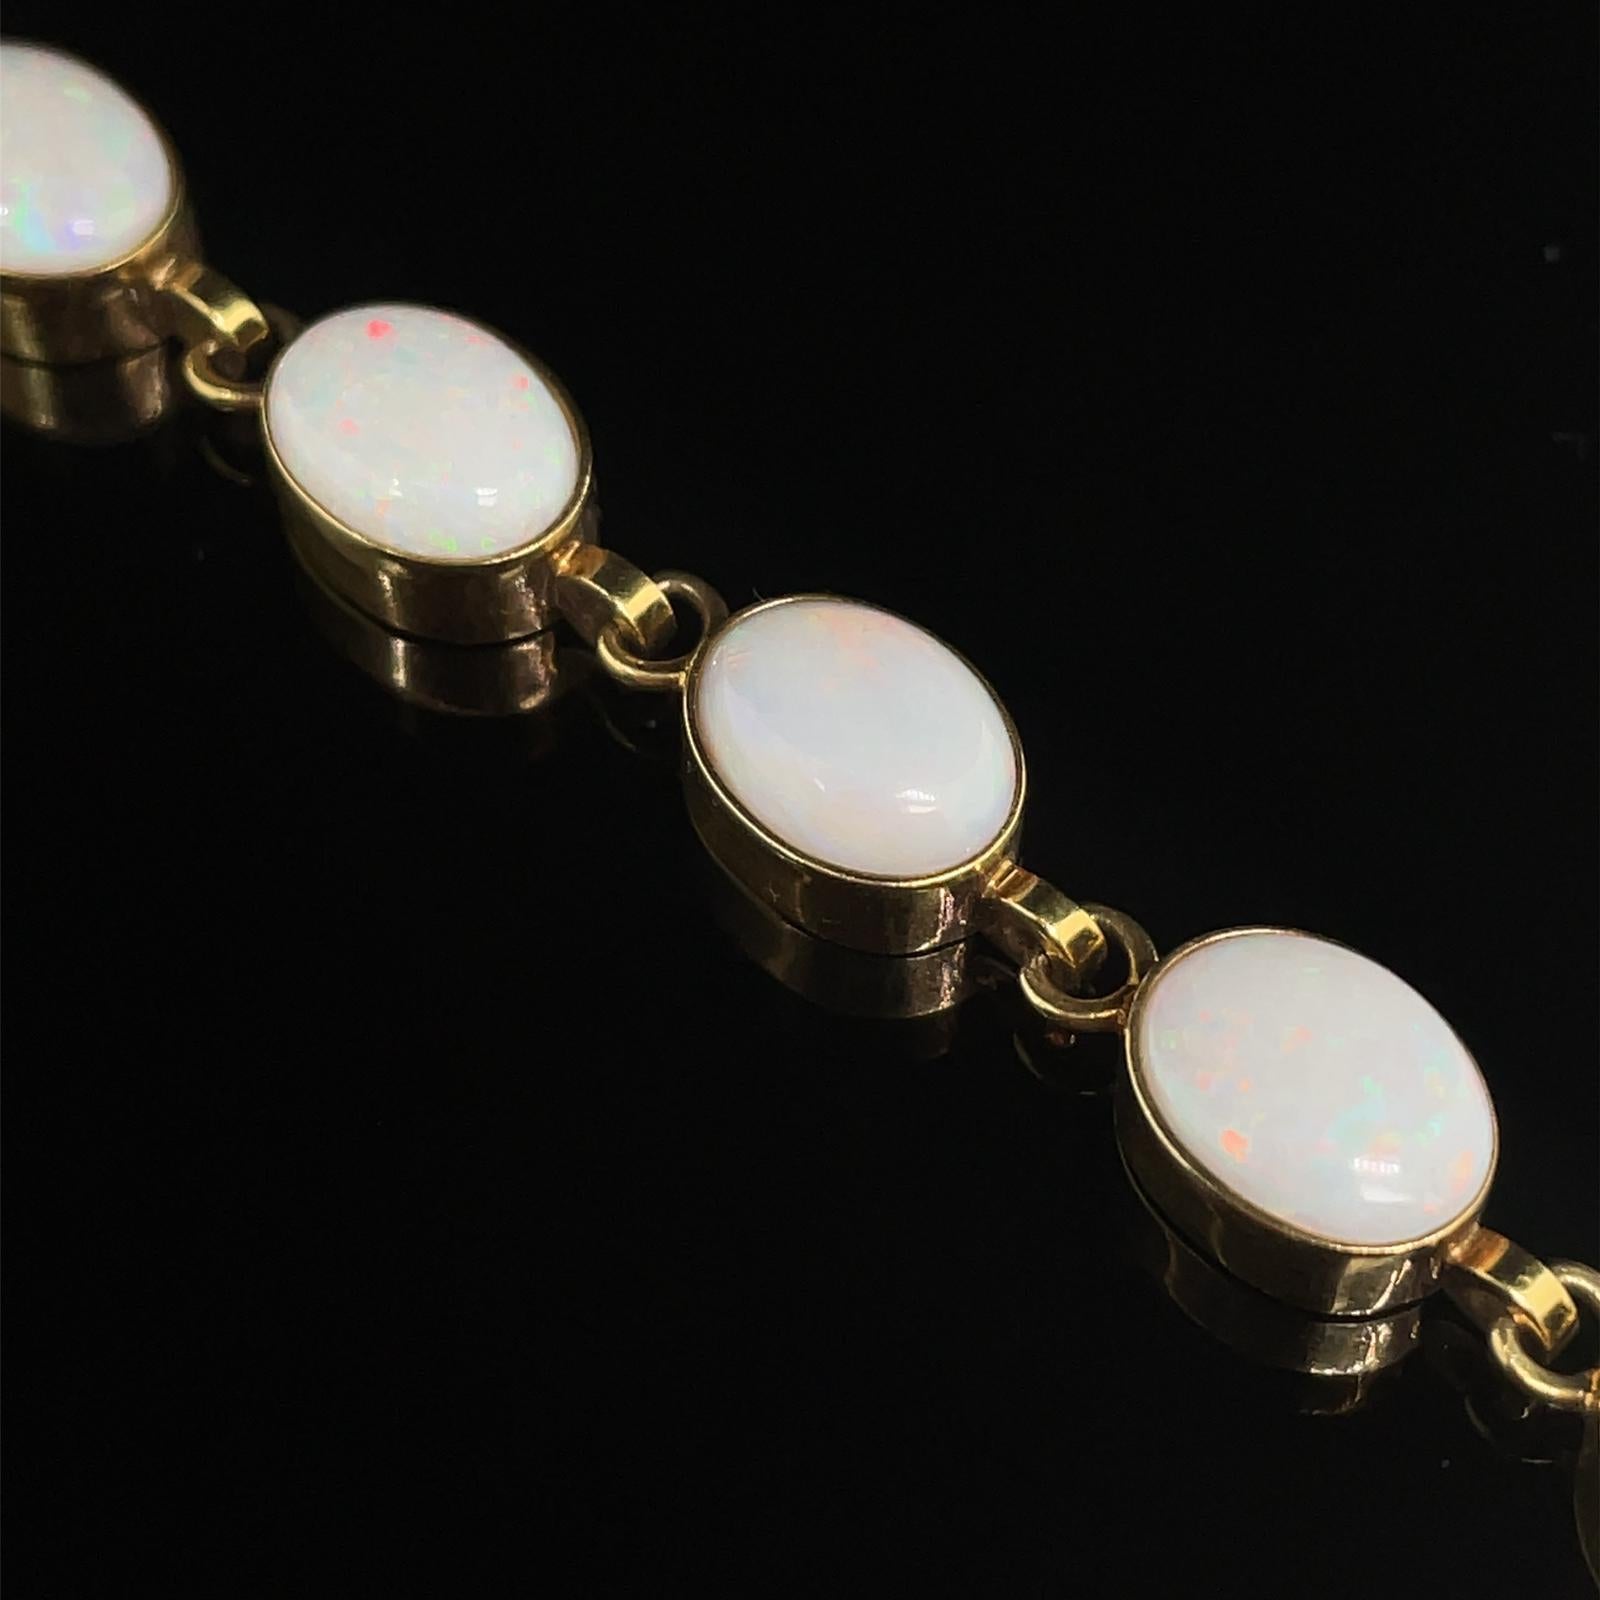 A vintage opal bracelet in 9 karat yellow gold, circa 1990.

This pretty bracelet comprises of oval cabochon white opals in elegant rubover settings joined with plain polished cable links, finished with a box clasp fitting and safety chain for added